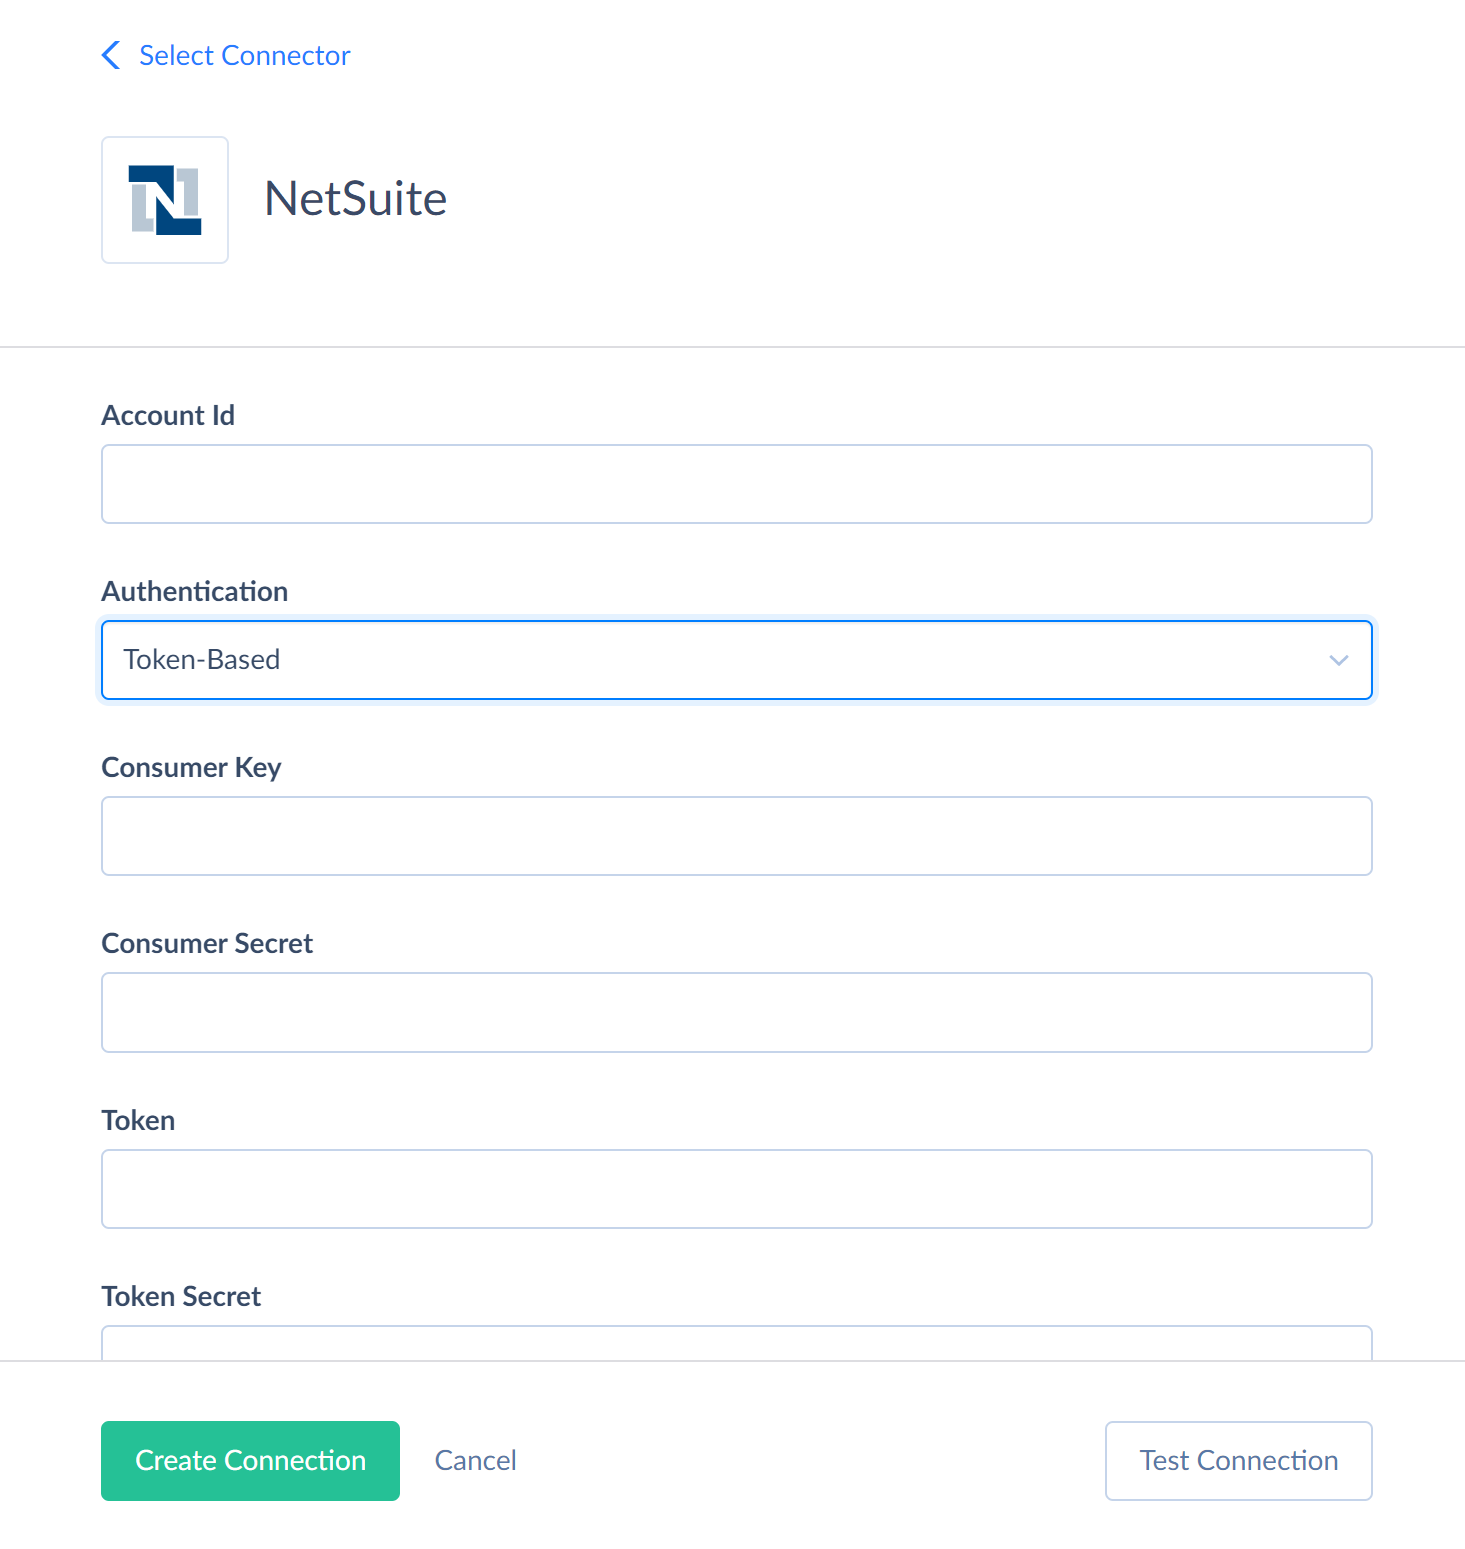 NetSuite connection editor - token-based authentication